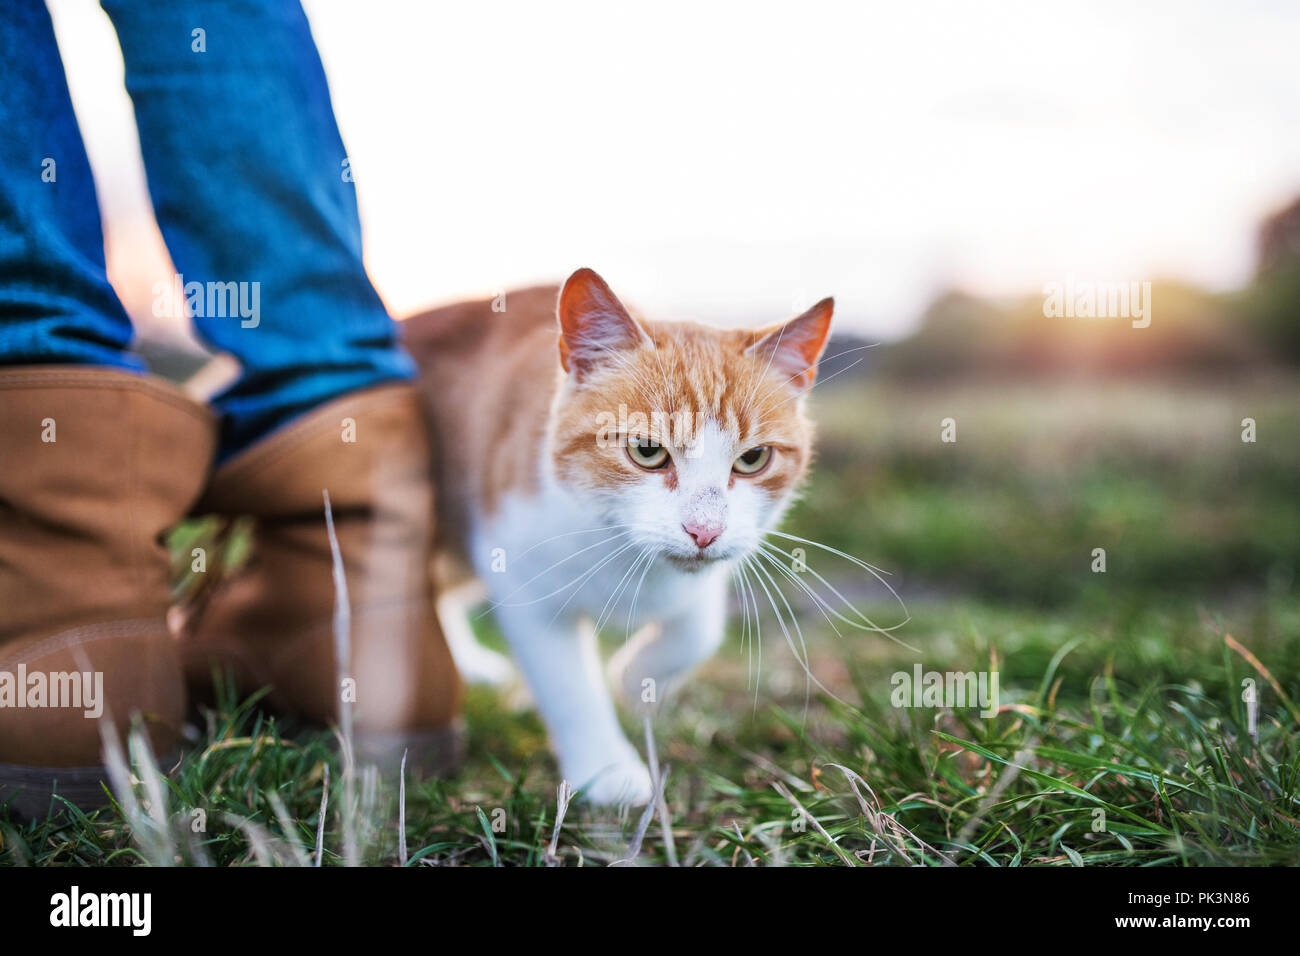 A cat rubbing against female legs outdoors in nature. Stock Photo